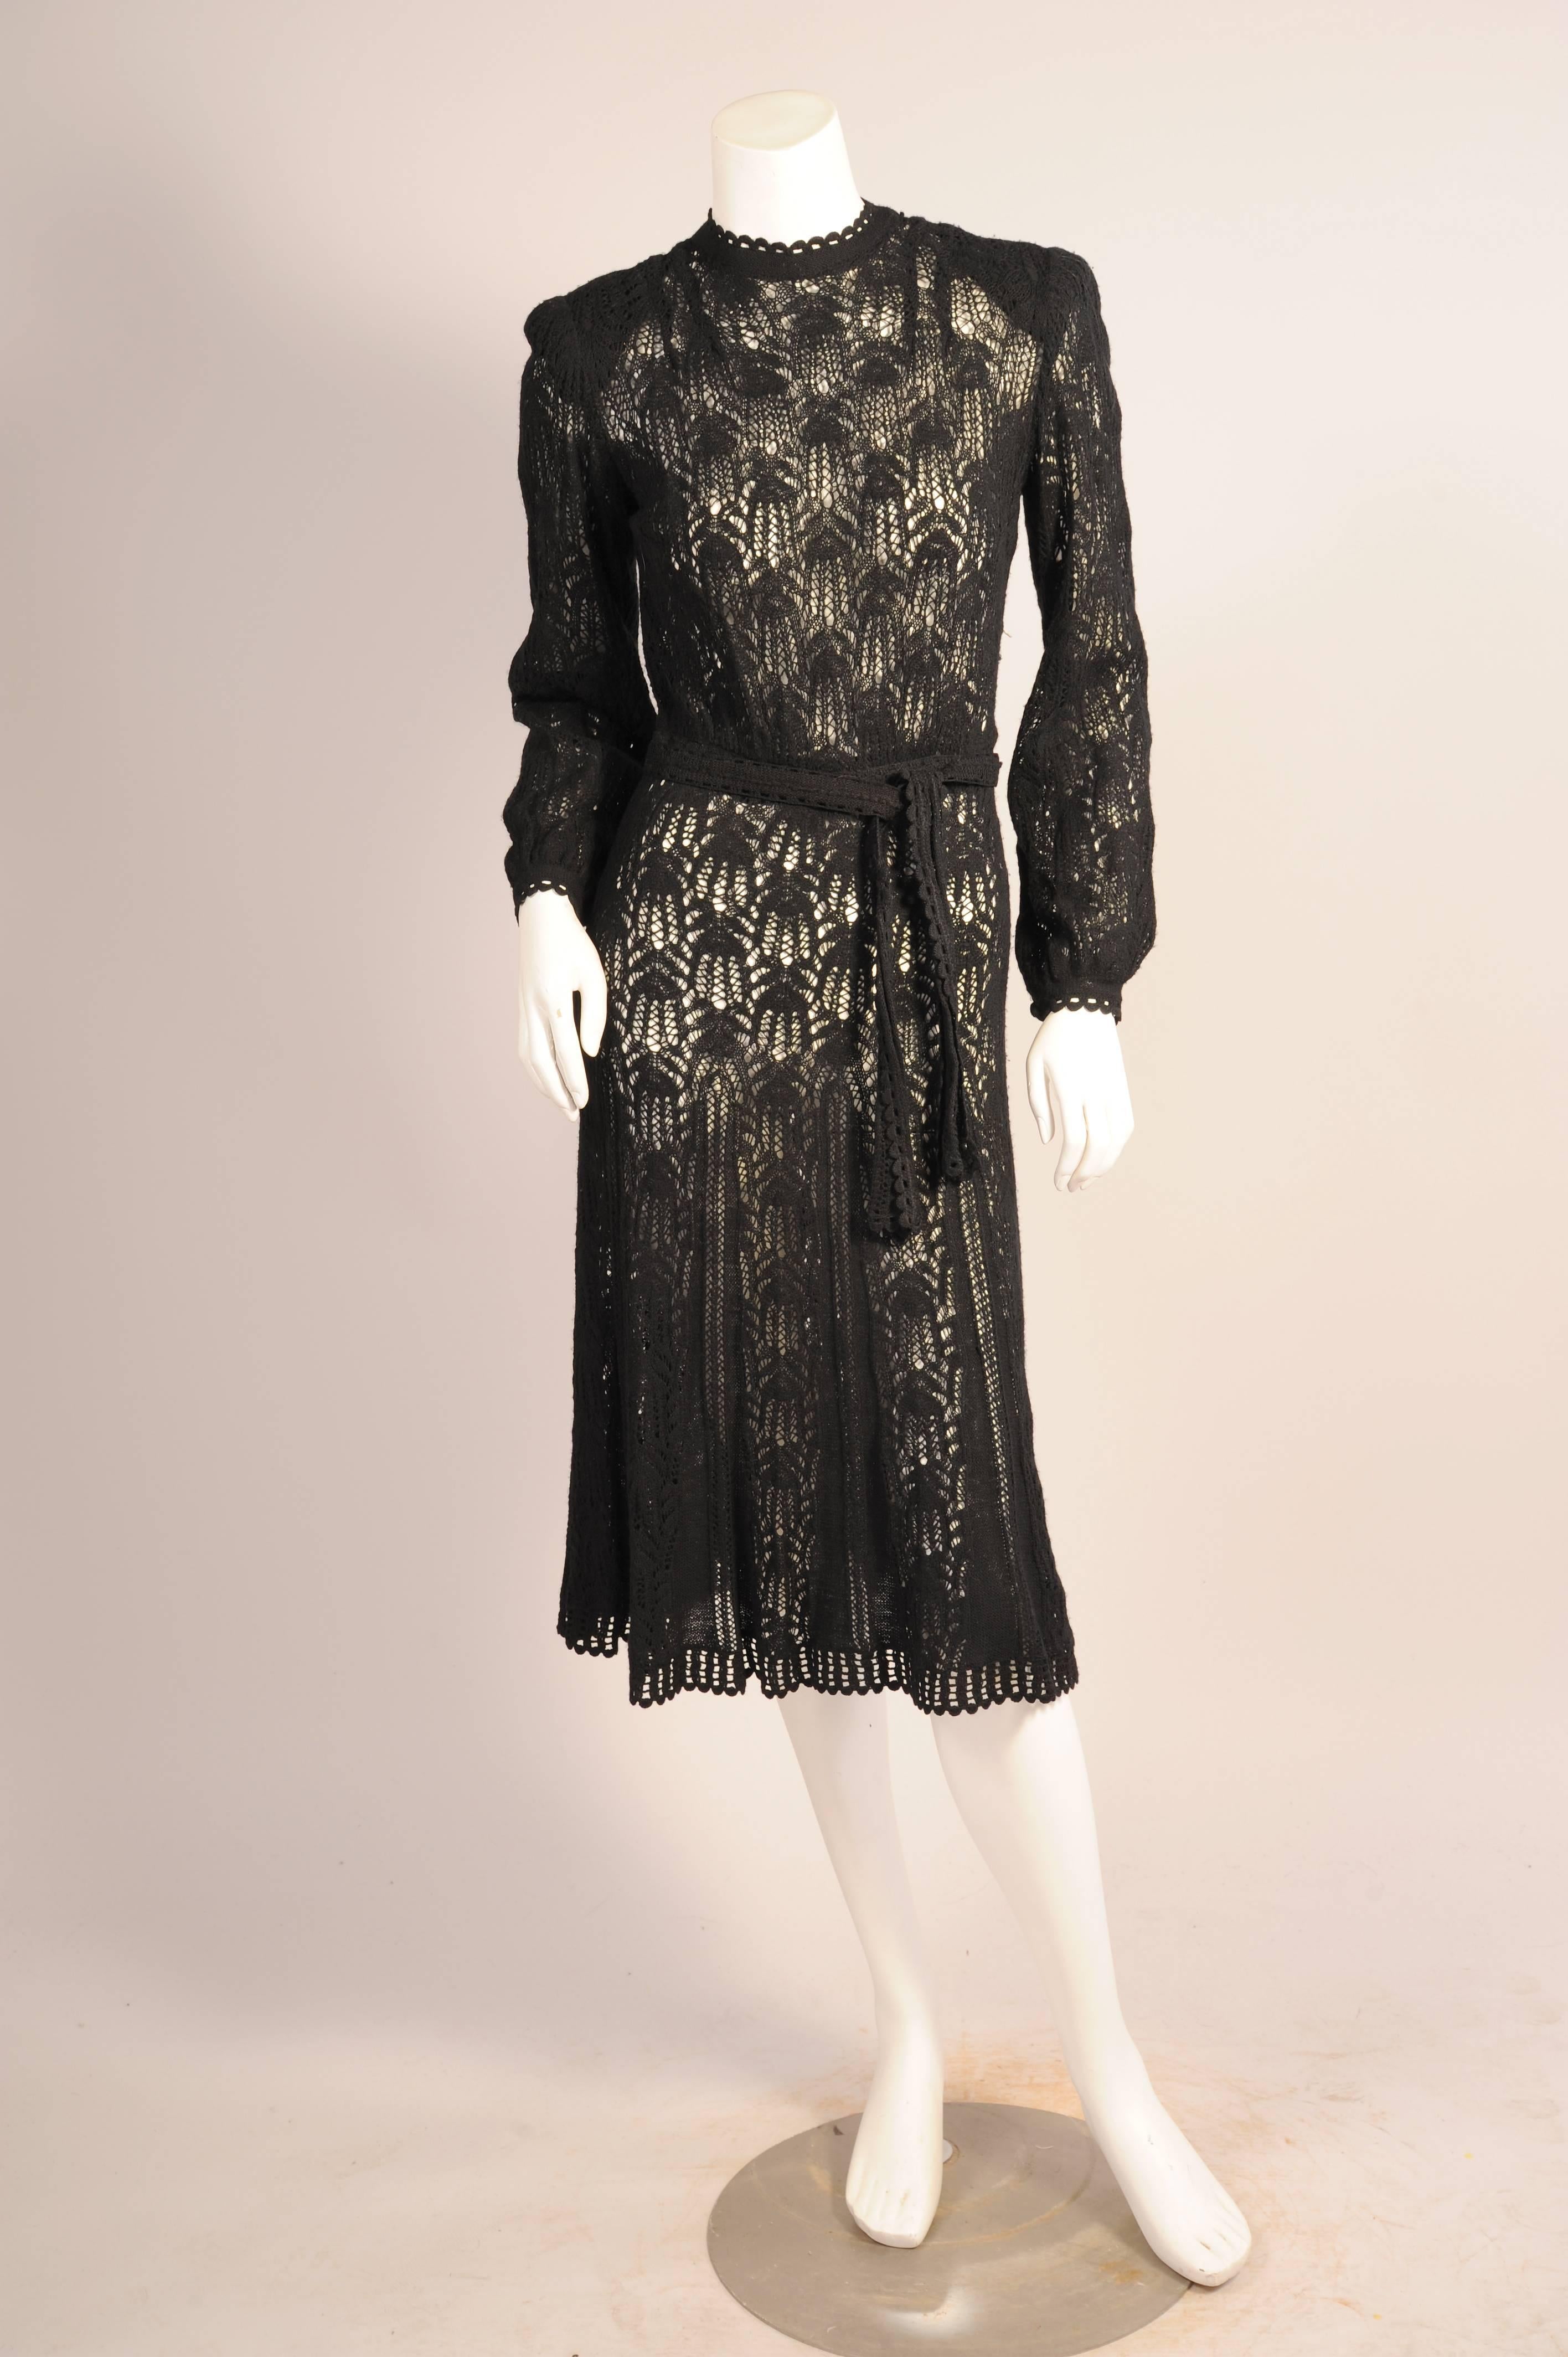 A gorgeous lacey pattern hand knit with fine black wool yarn adds a hint of sexiness to this dress. The round neckline, cuffs, hemline and belt are finished with an open work scalloped pattern. The dress has nine small knit covered buttons at the